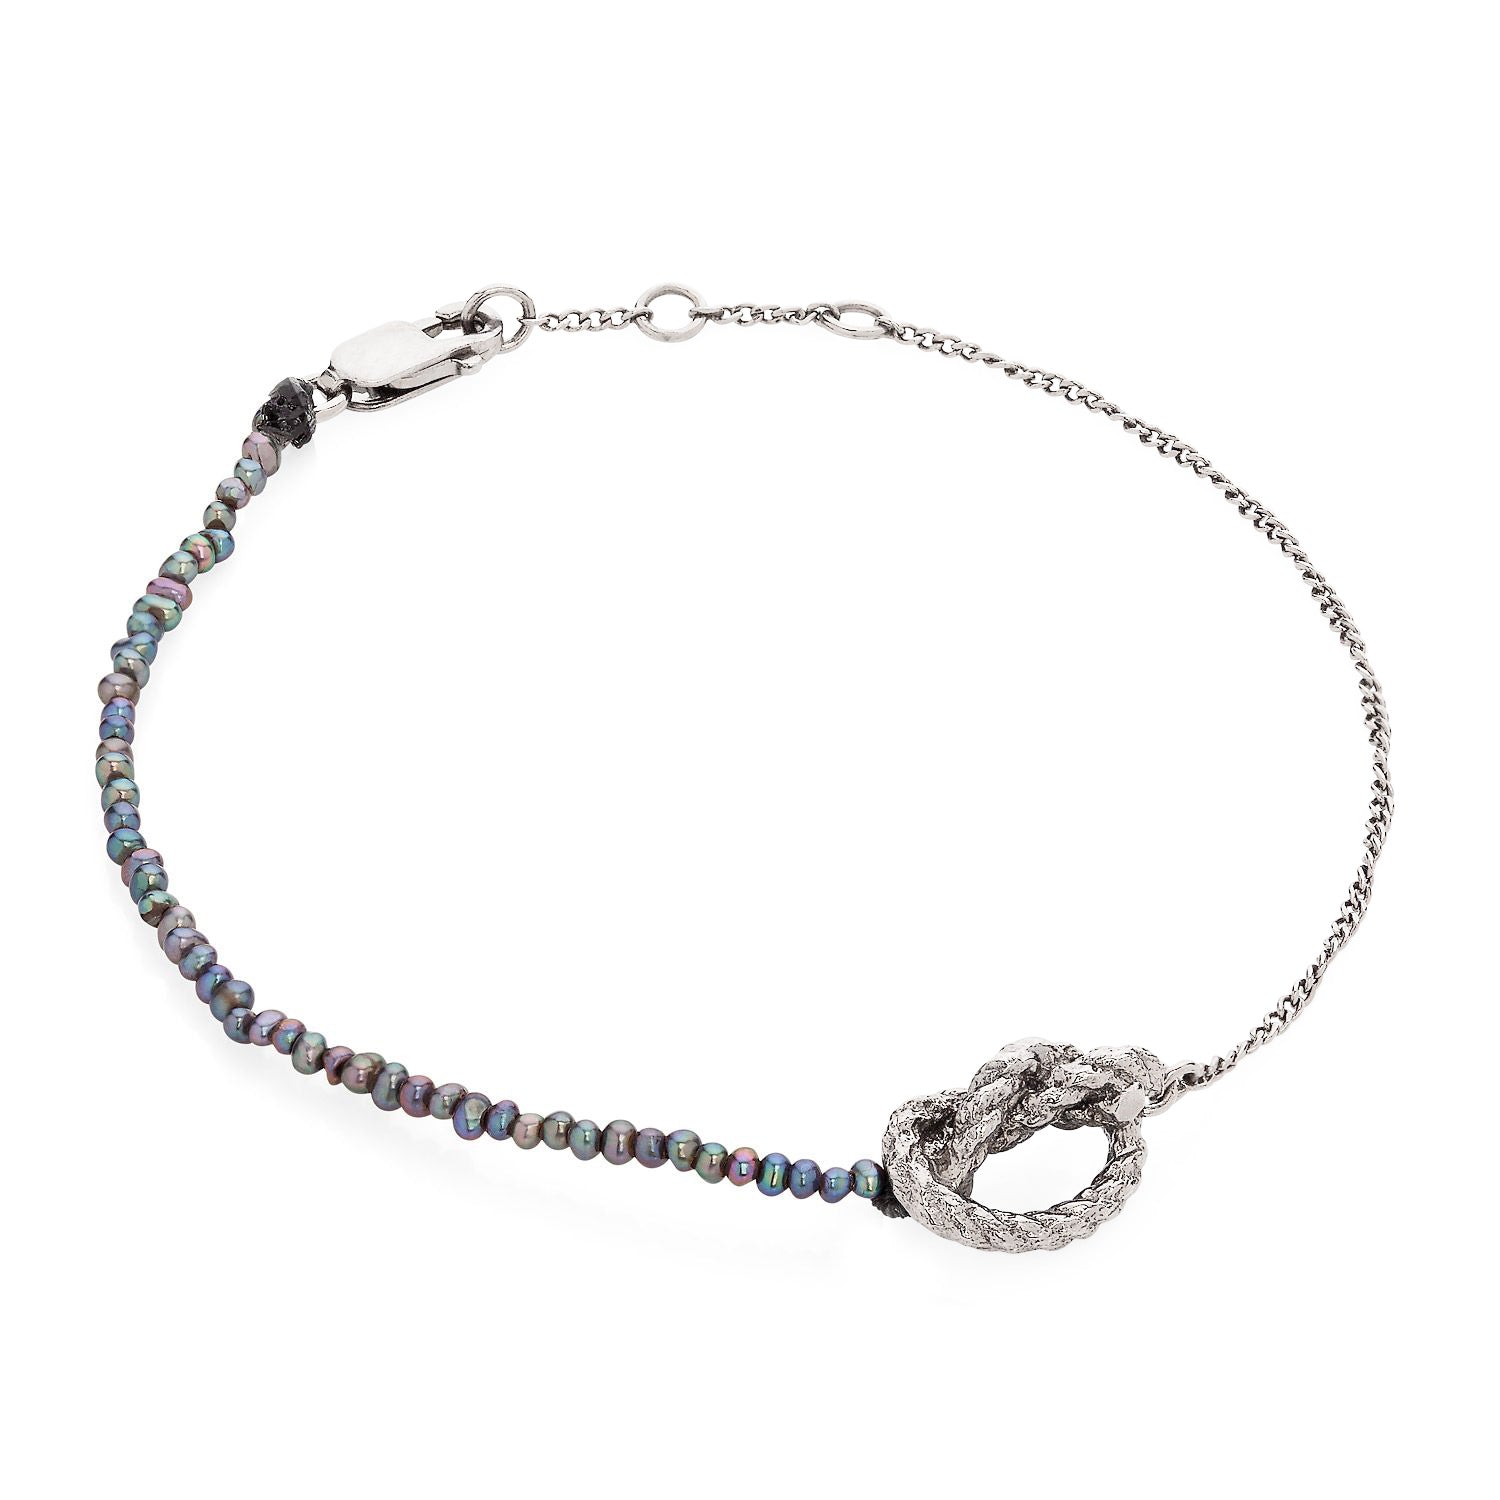 Kerry Huff silver chain 1/2 and 1/2 black seed pearl bracelet.